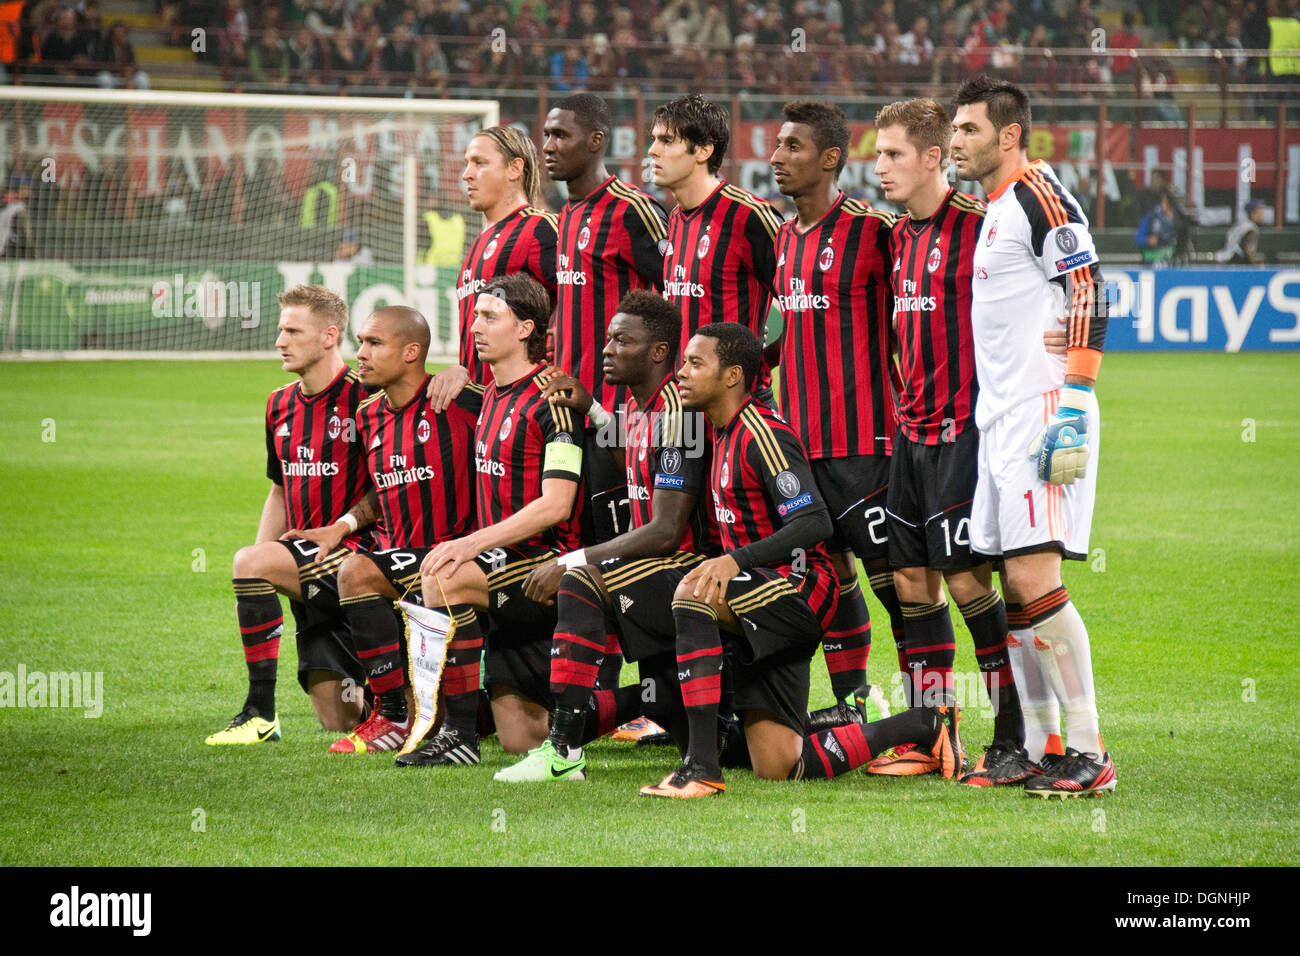 Ac Milan Team Group High Resolution Stock Photography and Images - Alamy